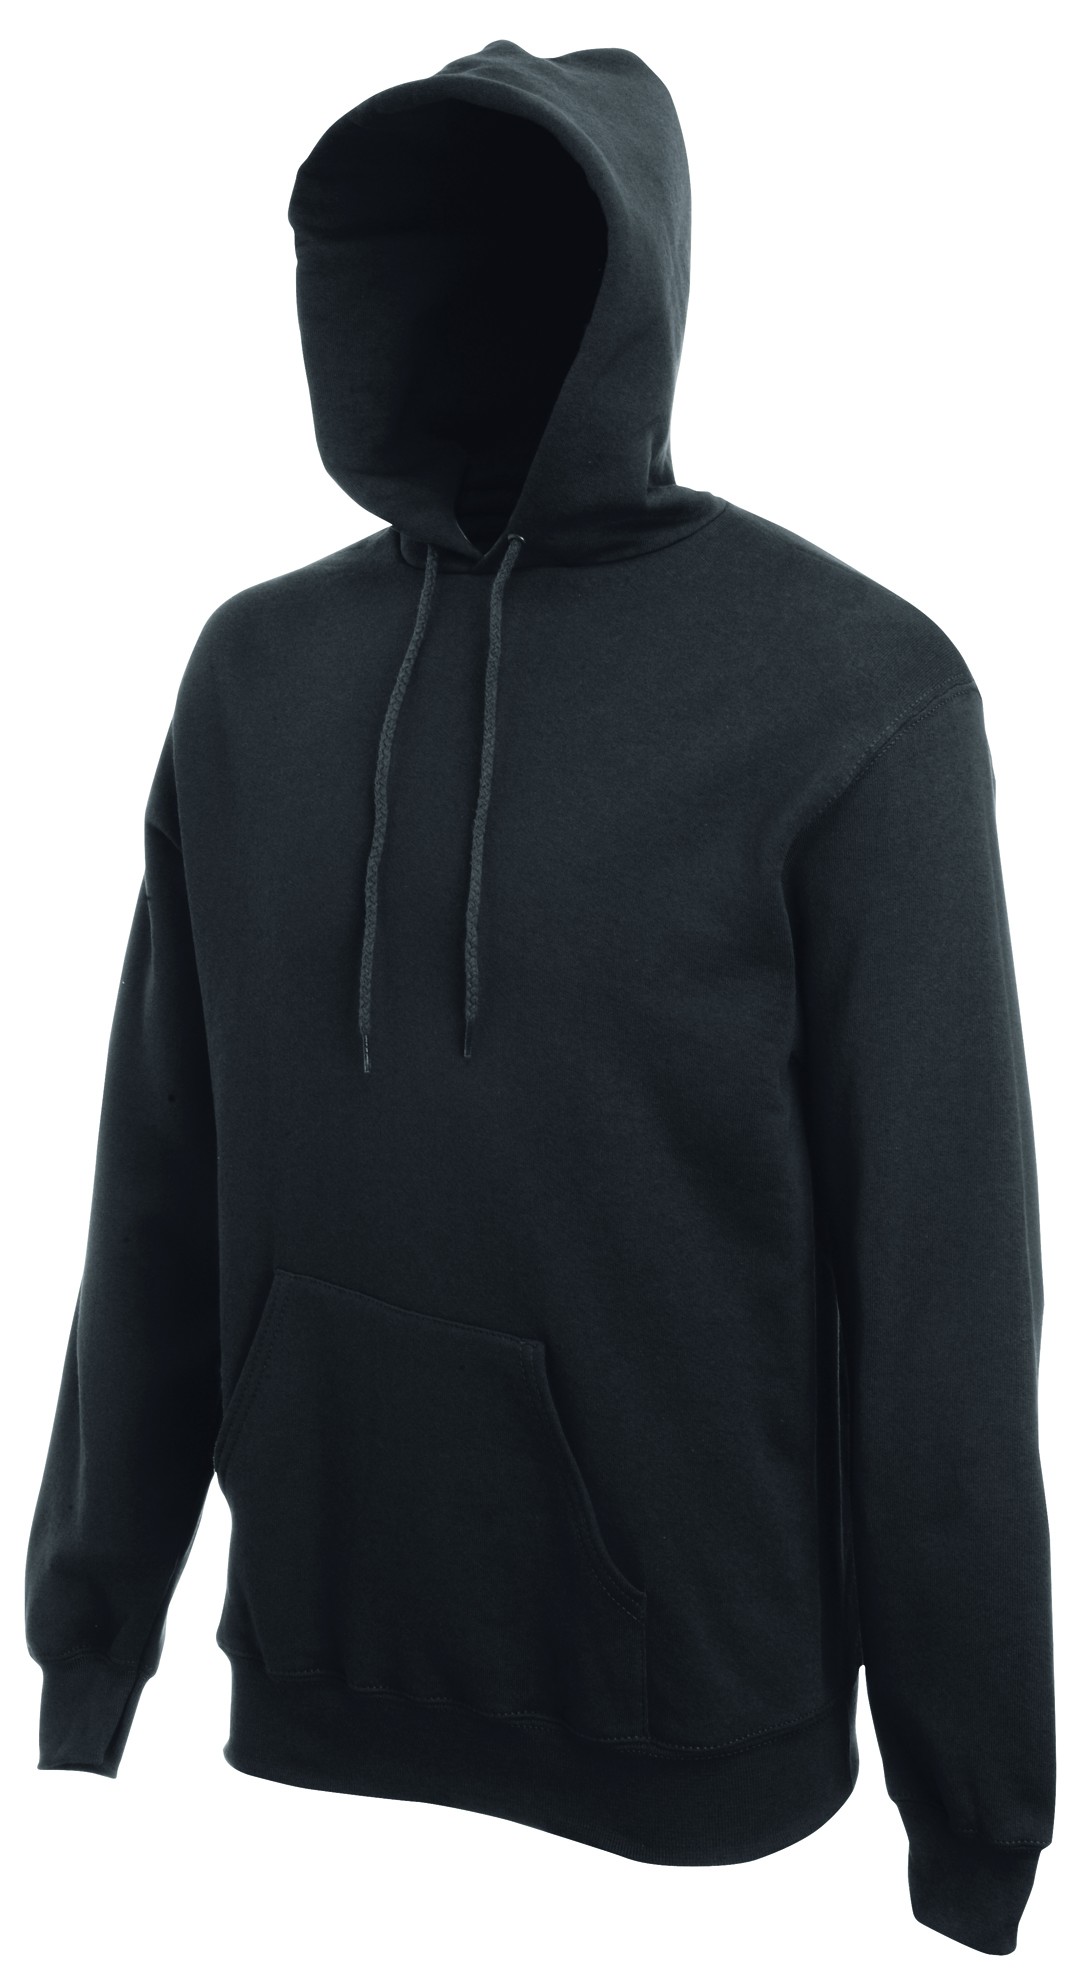 Fruit of the Loom Hooded Sweater SC244C Charcoal